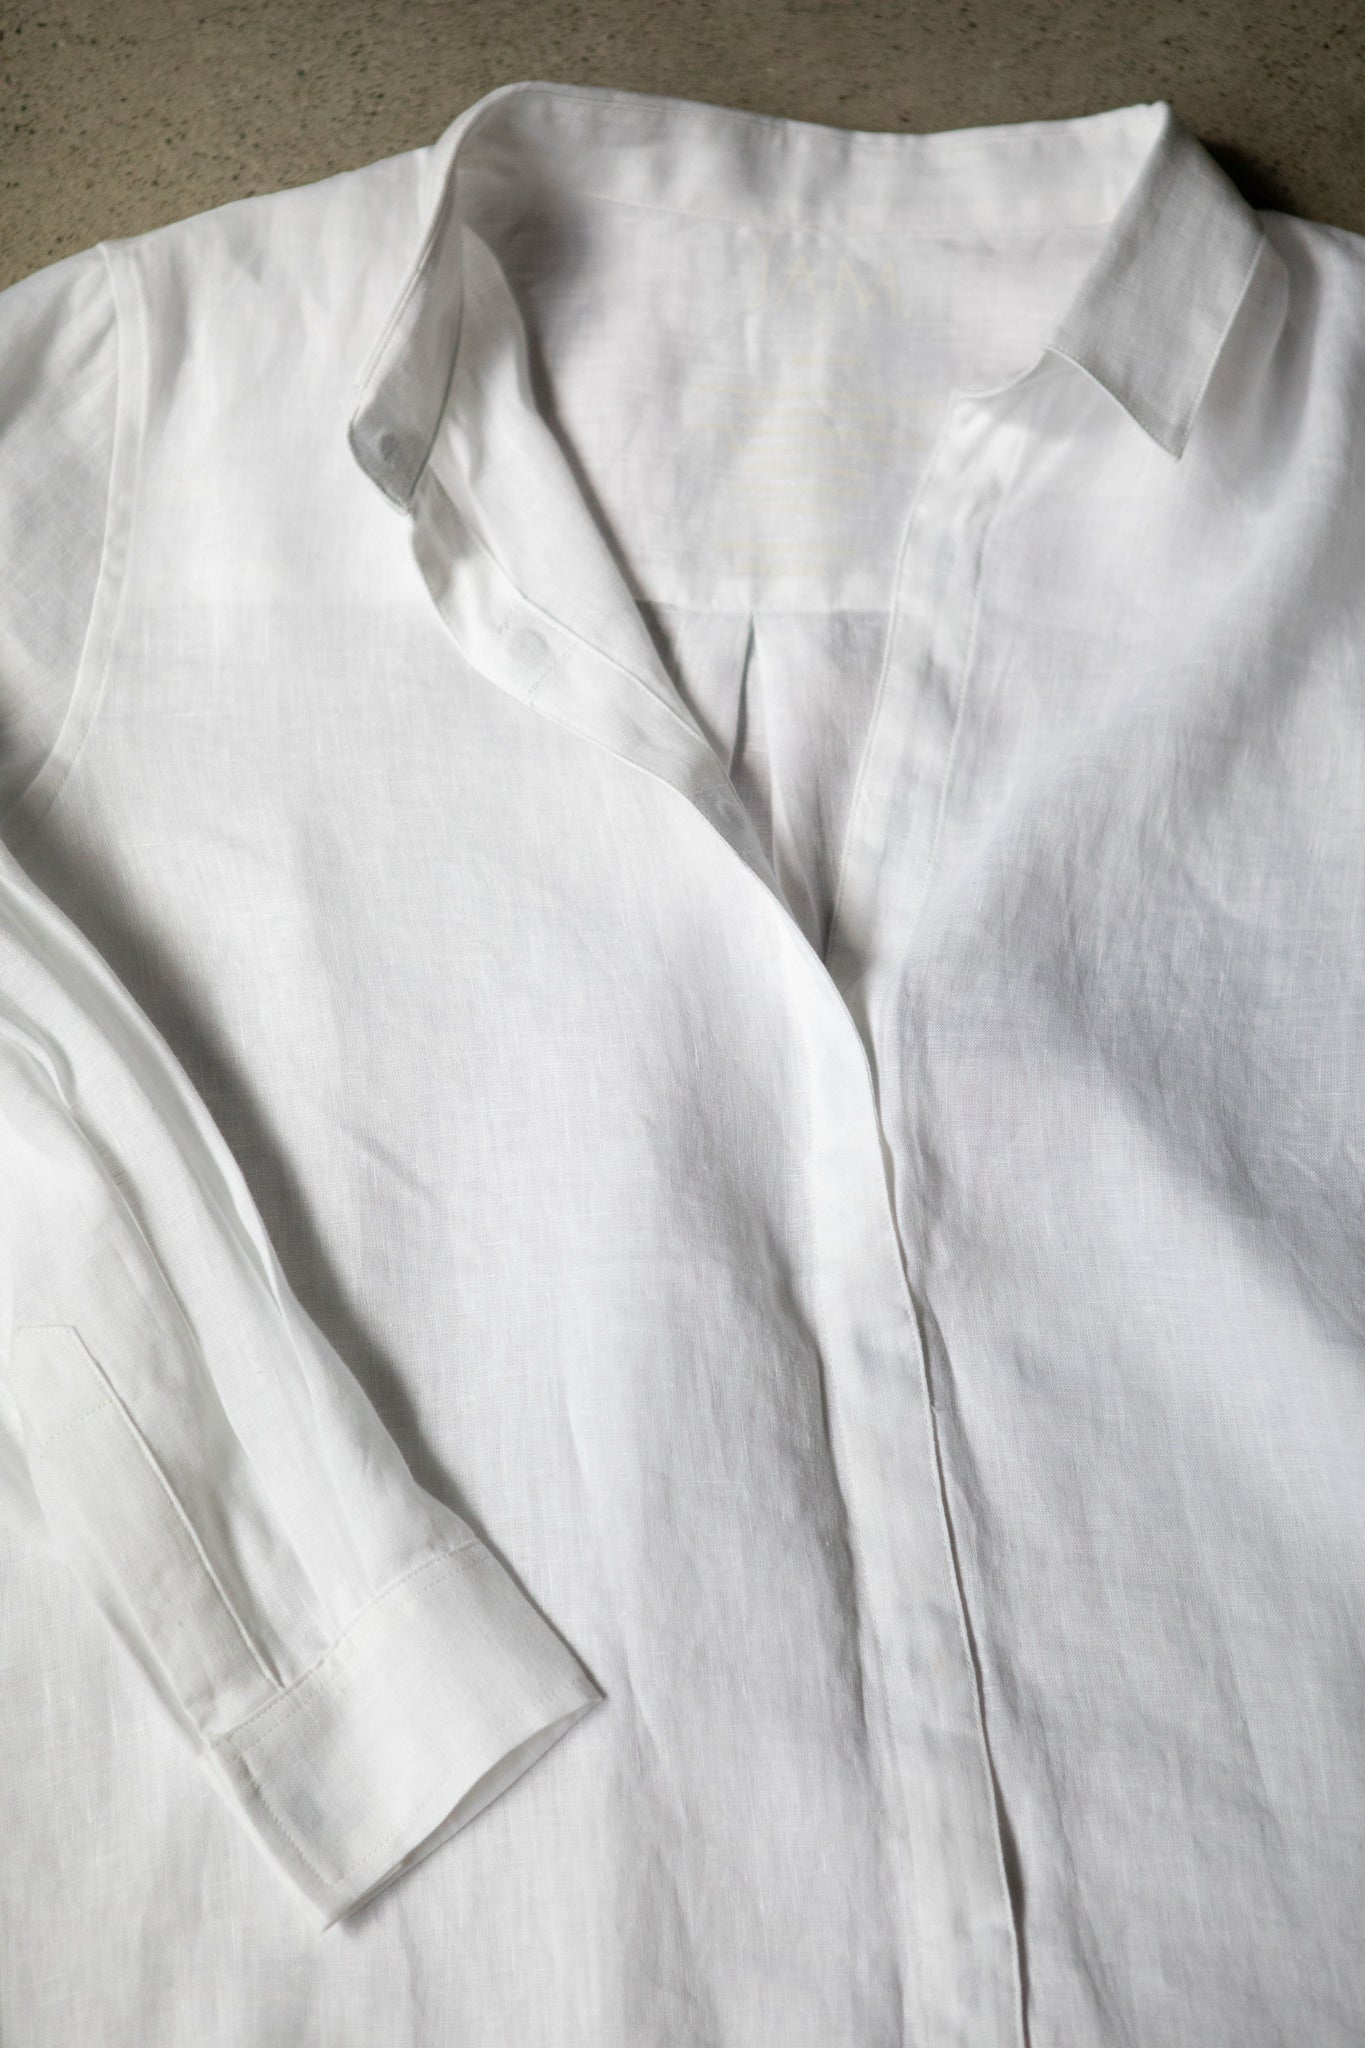 A white linen shirt laying on concrete. The shirt has magnetic closures in lieu of buttons.